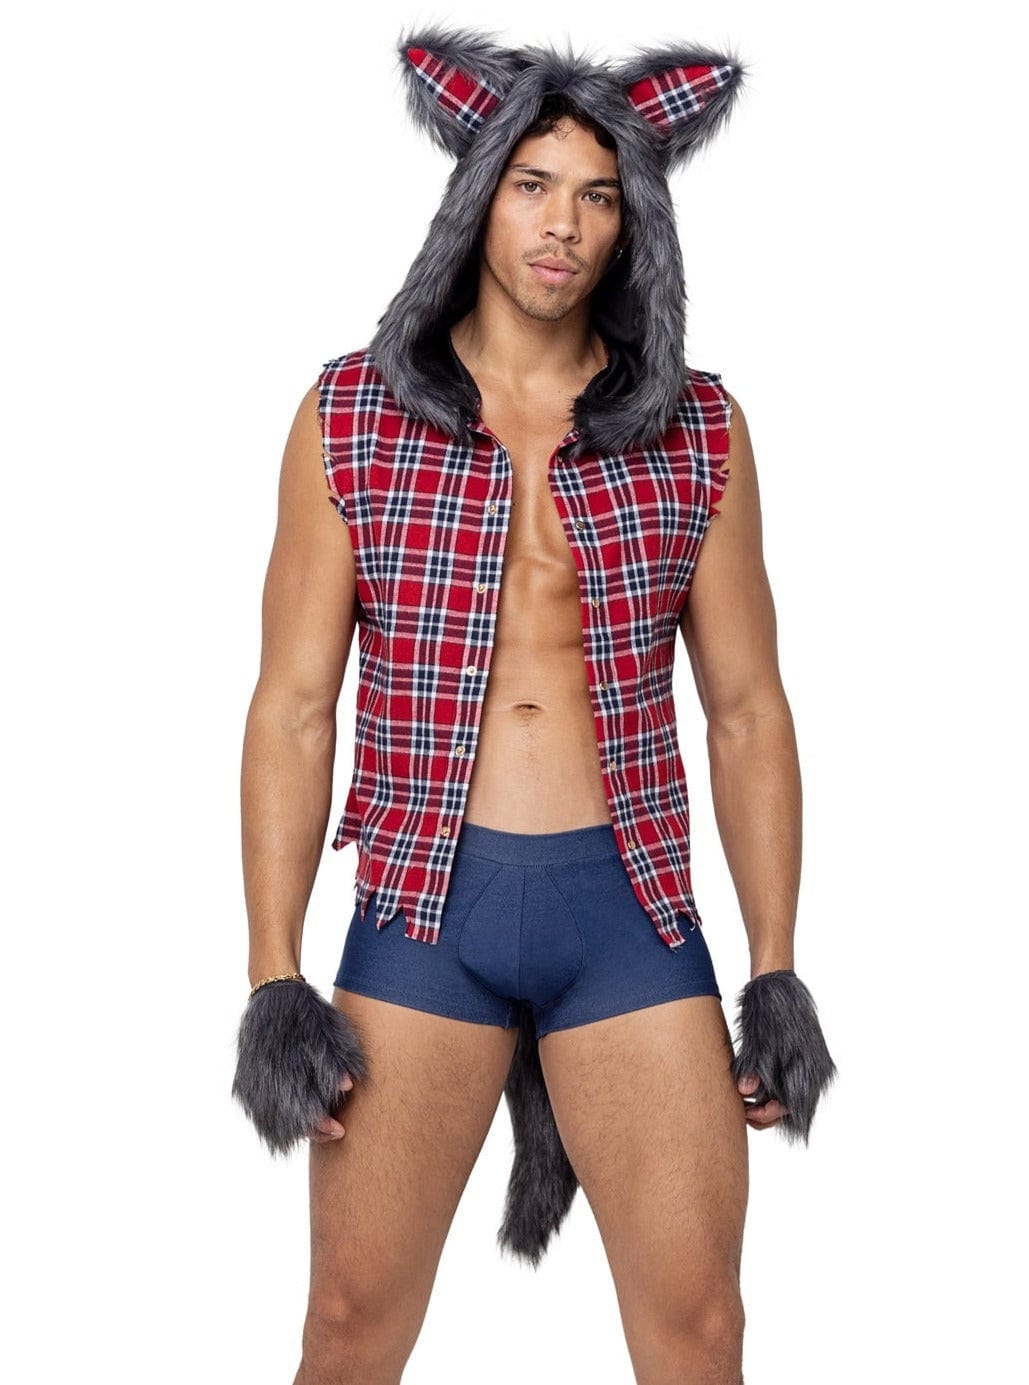 Roma Small / Multi 3 Pc Men's Full Moon Werewolf Halloween Cosplay Costume 6187-RBG-S 2023 Sexy Men's 3 Pc Football Touchdown Hunk Halloween Costume Apparel & Accessories > Costumes & Accessories